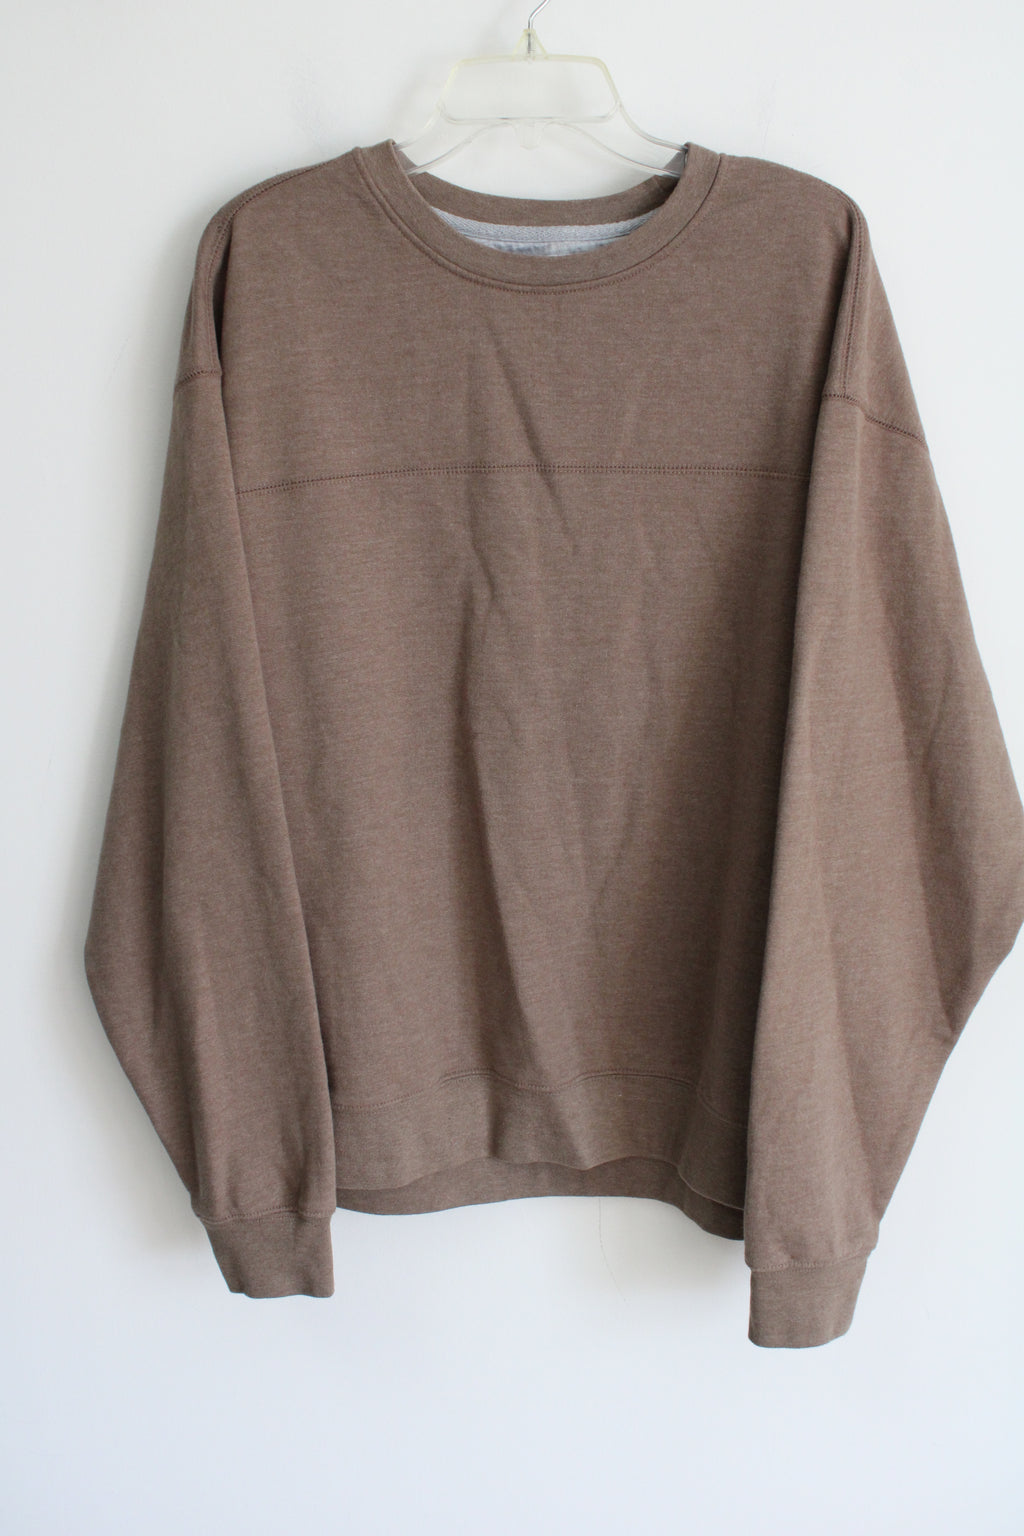 North Hudson Outfitters Brown Long Sleeved Sweatshirt | XL